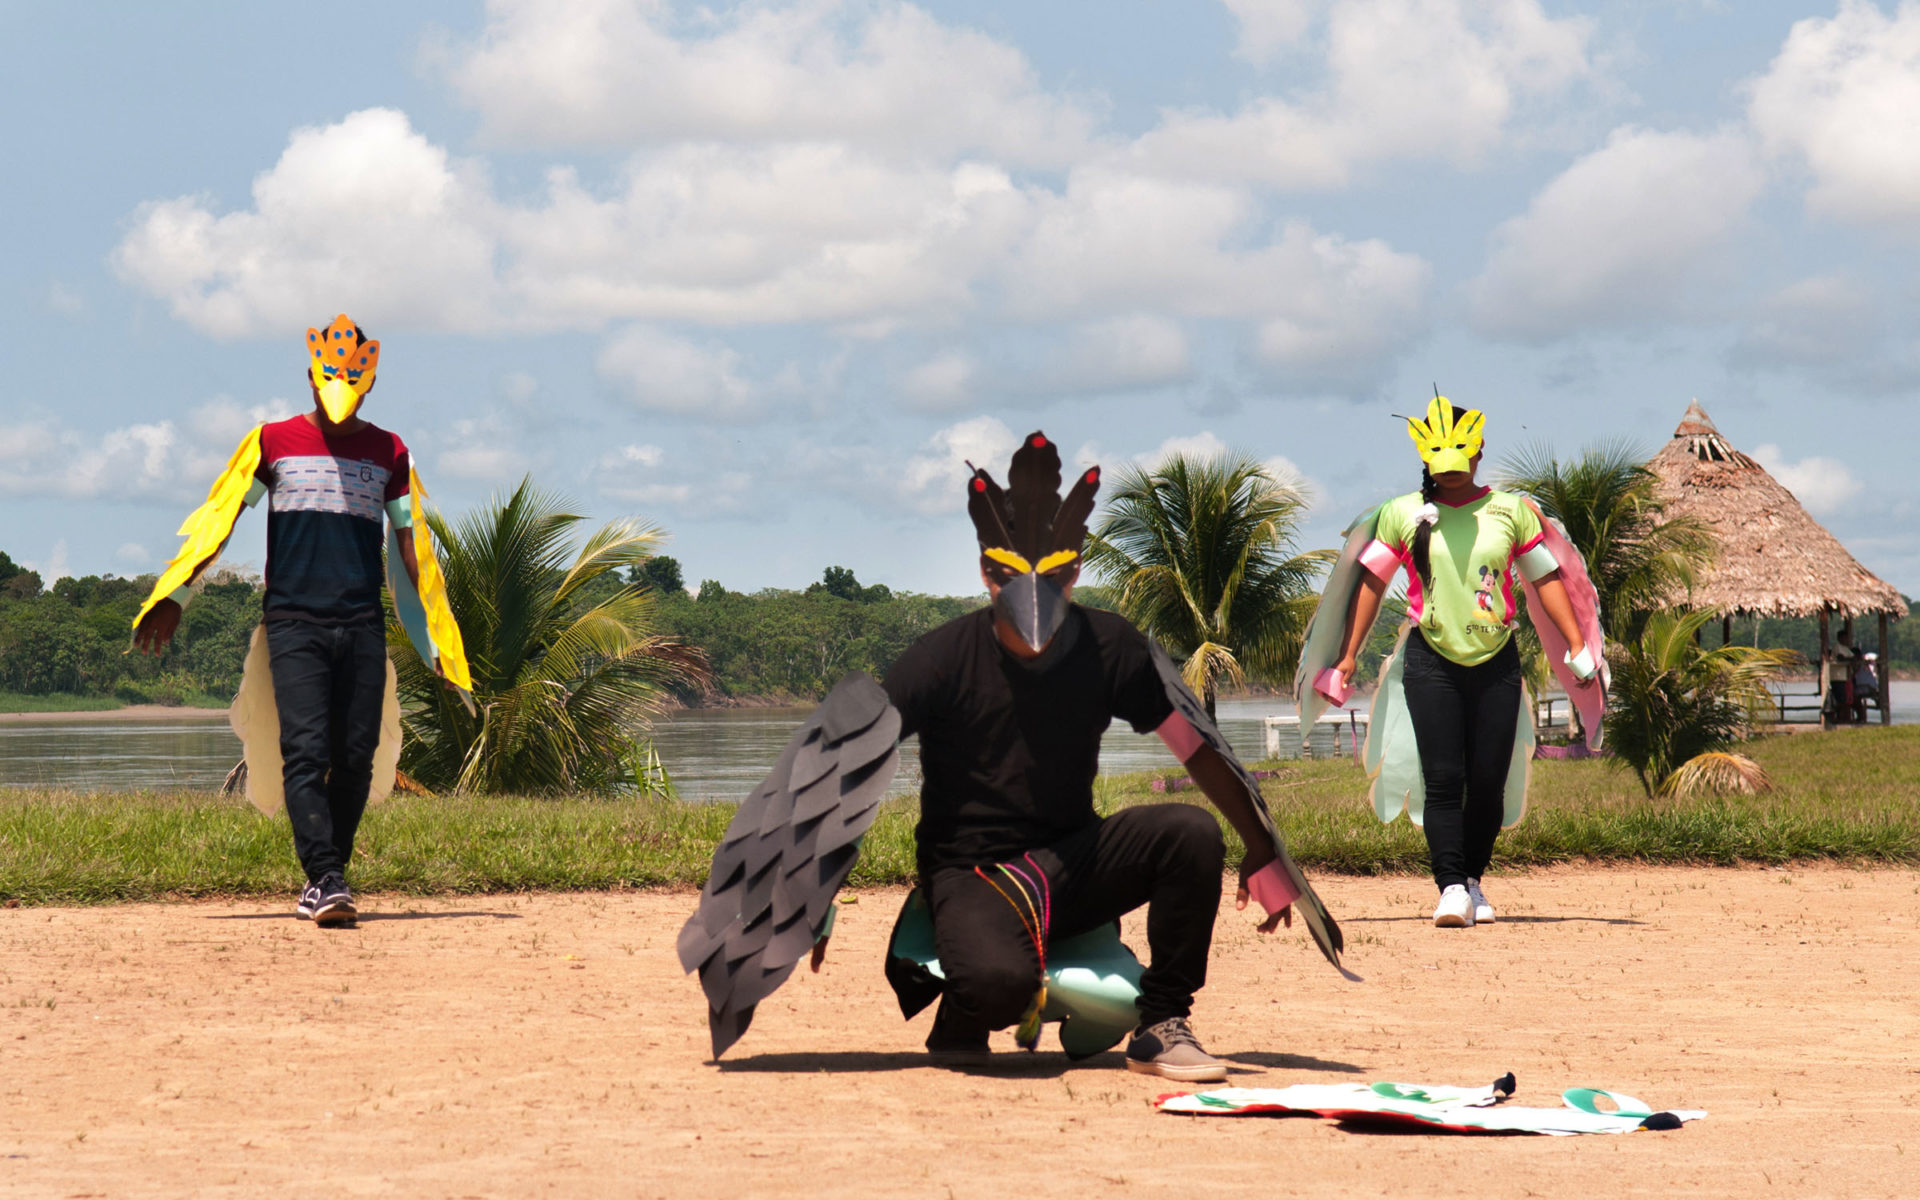 Youth dressed as birds during outdoor play